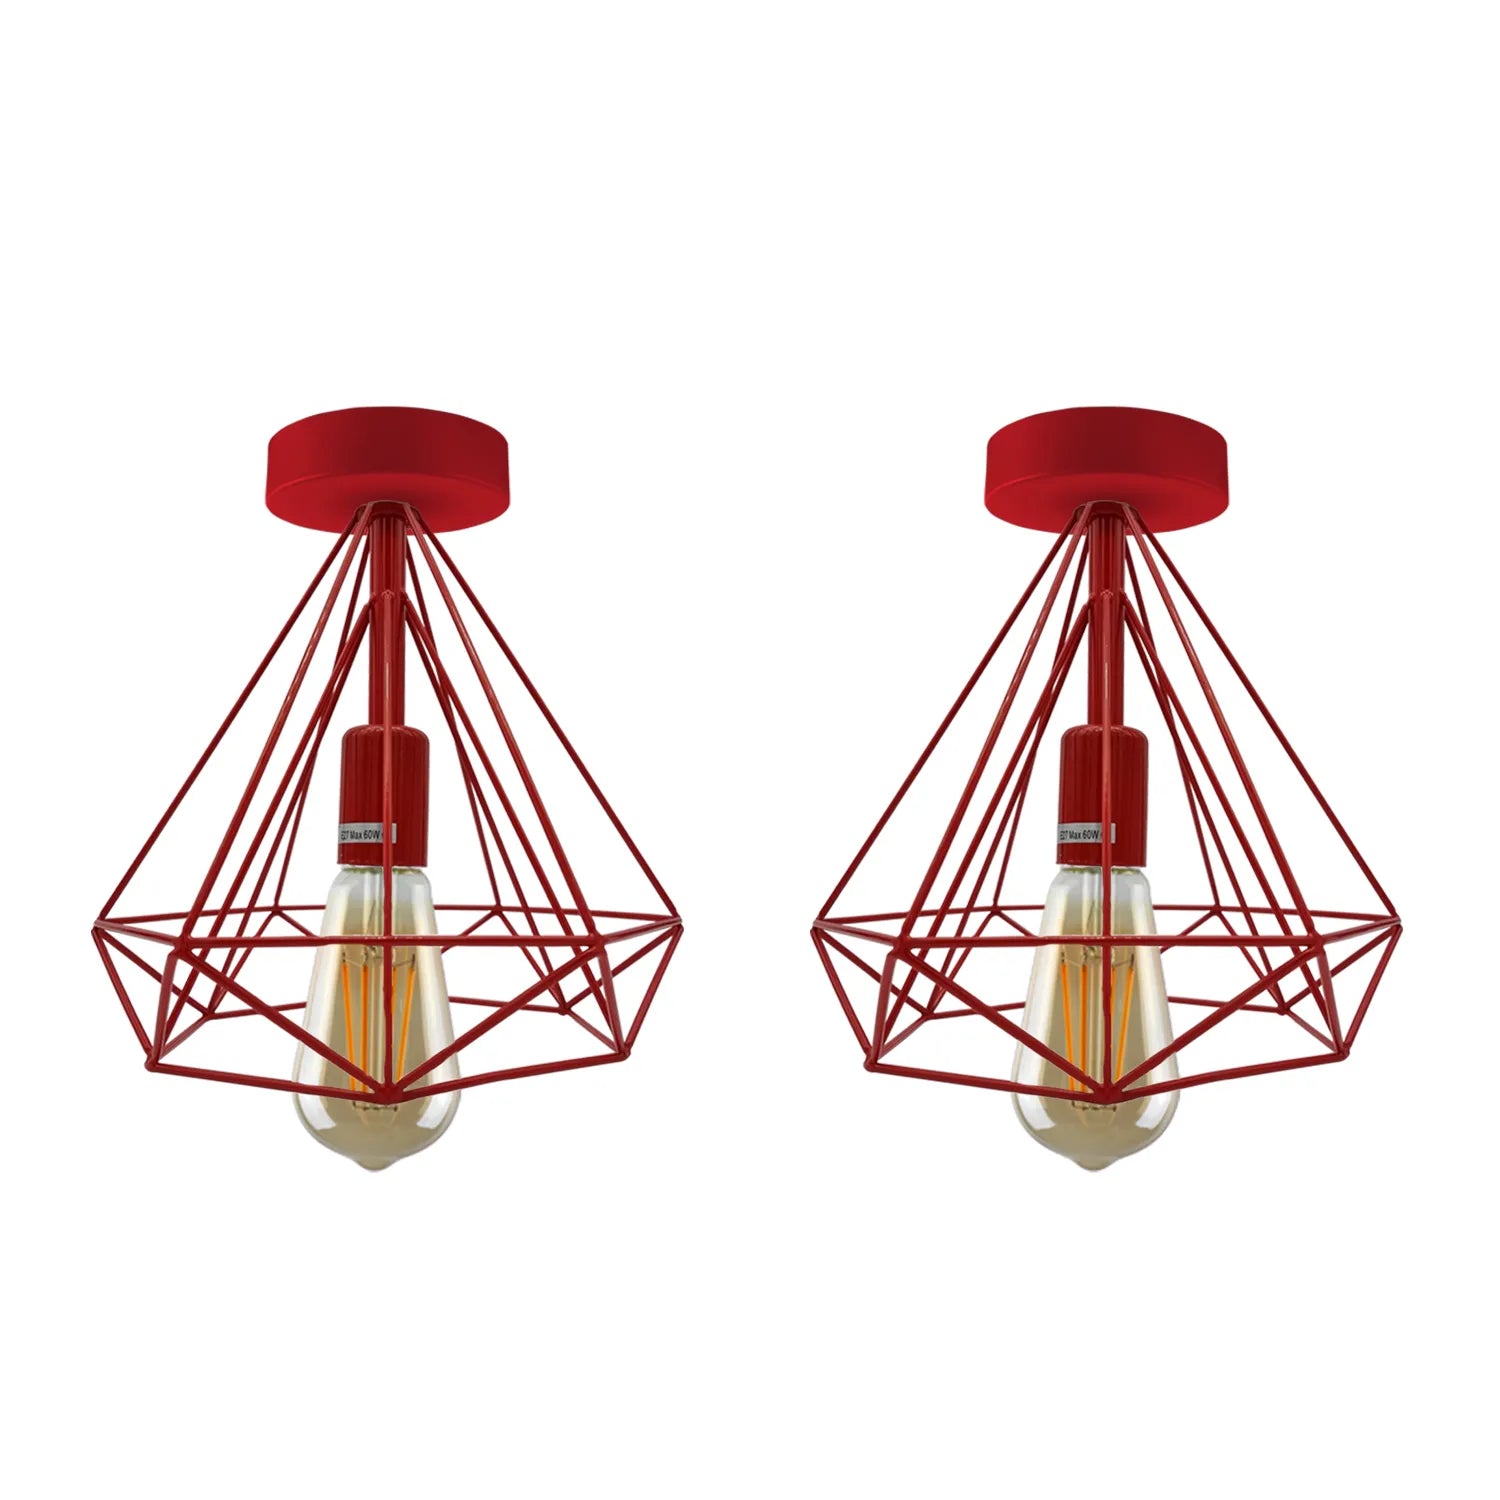 Red Semi Flush Mount Ceiling Light Fixture Metal Cage Lampshade E27 Holder~4199